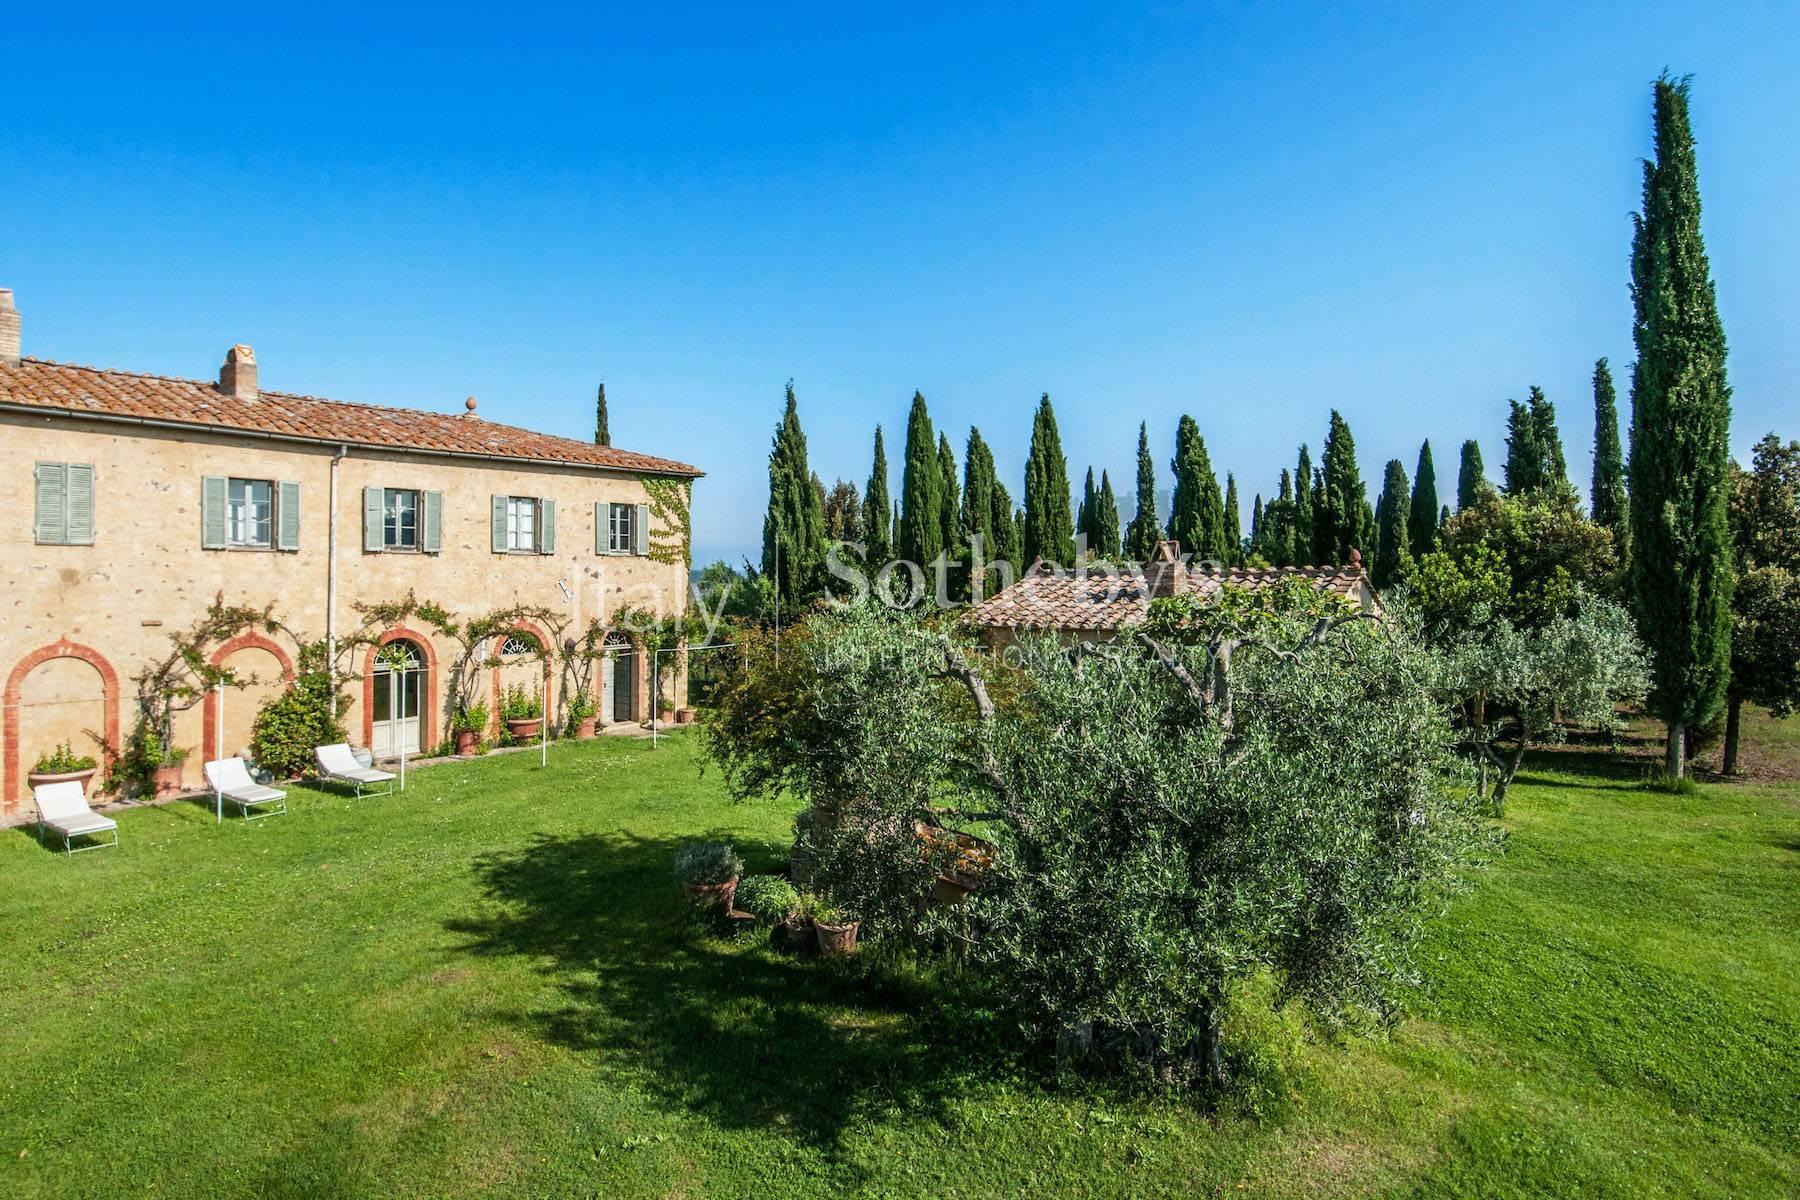 A charming Tuscan villa in the heart of Montalcino - 15